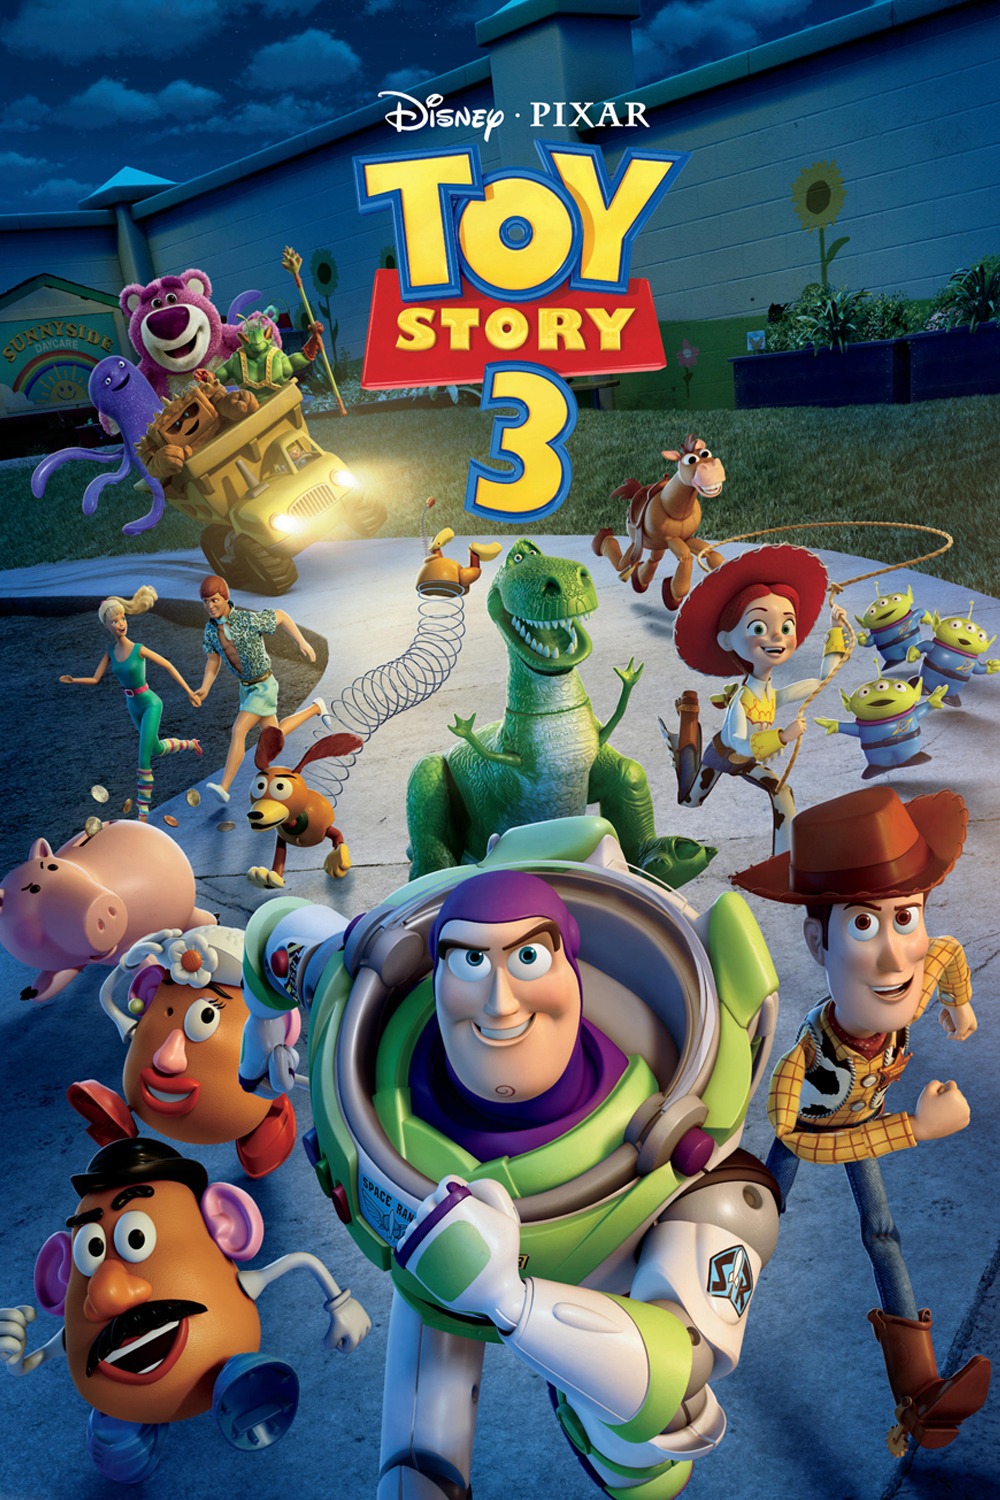 ToyStory3Poster